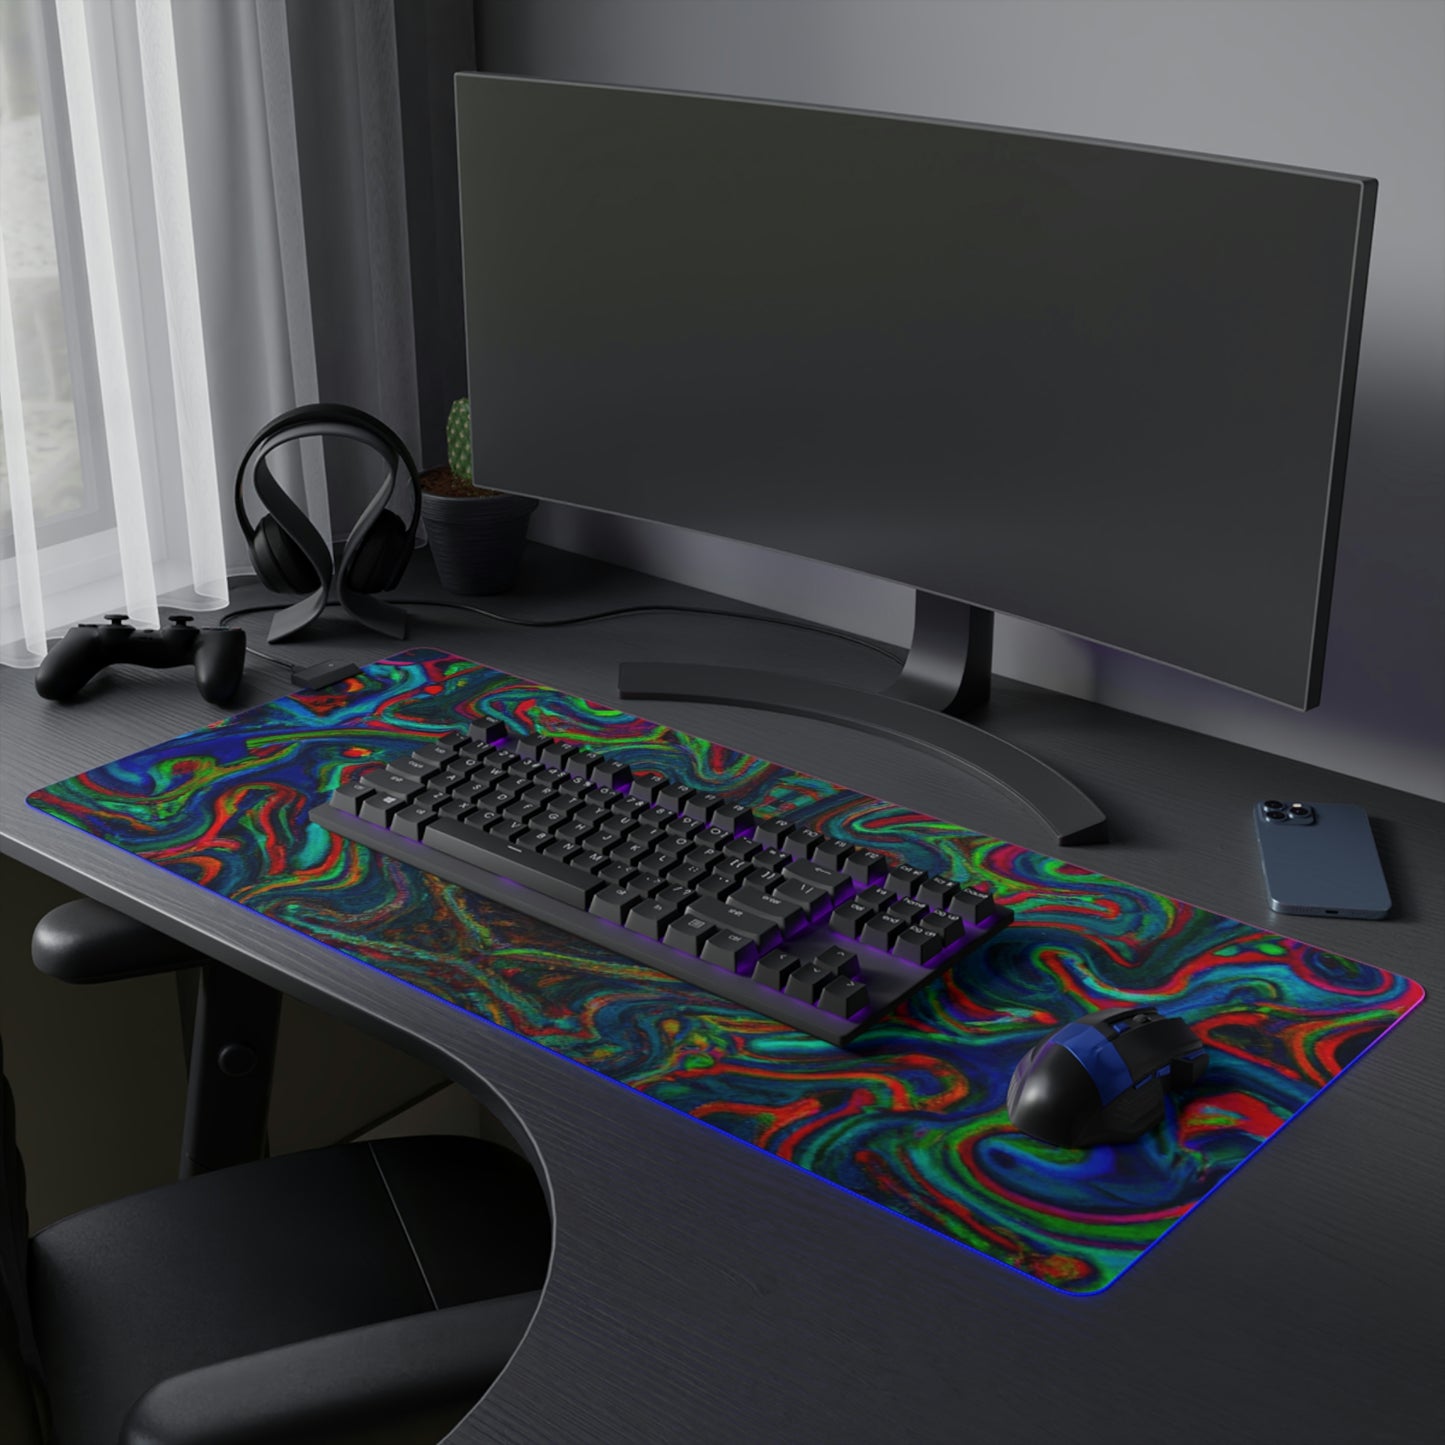 Bubble Bopper Bobbie - Psychedelic Trippy LED Light Up Gaming Mouse Pad